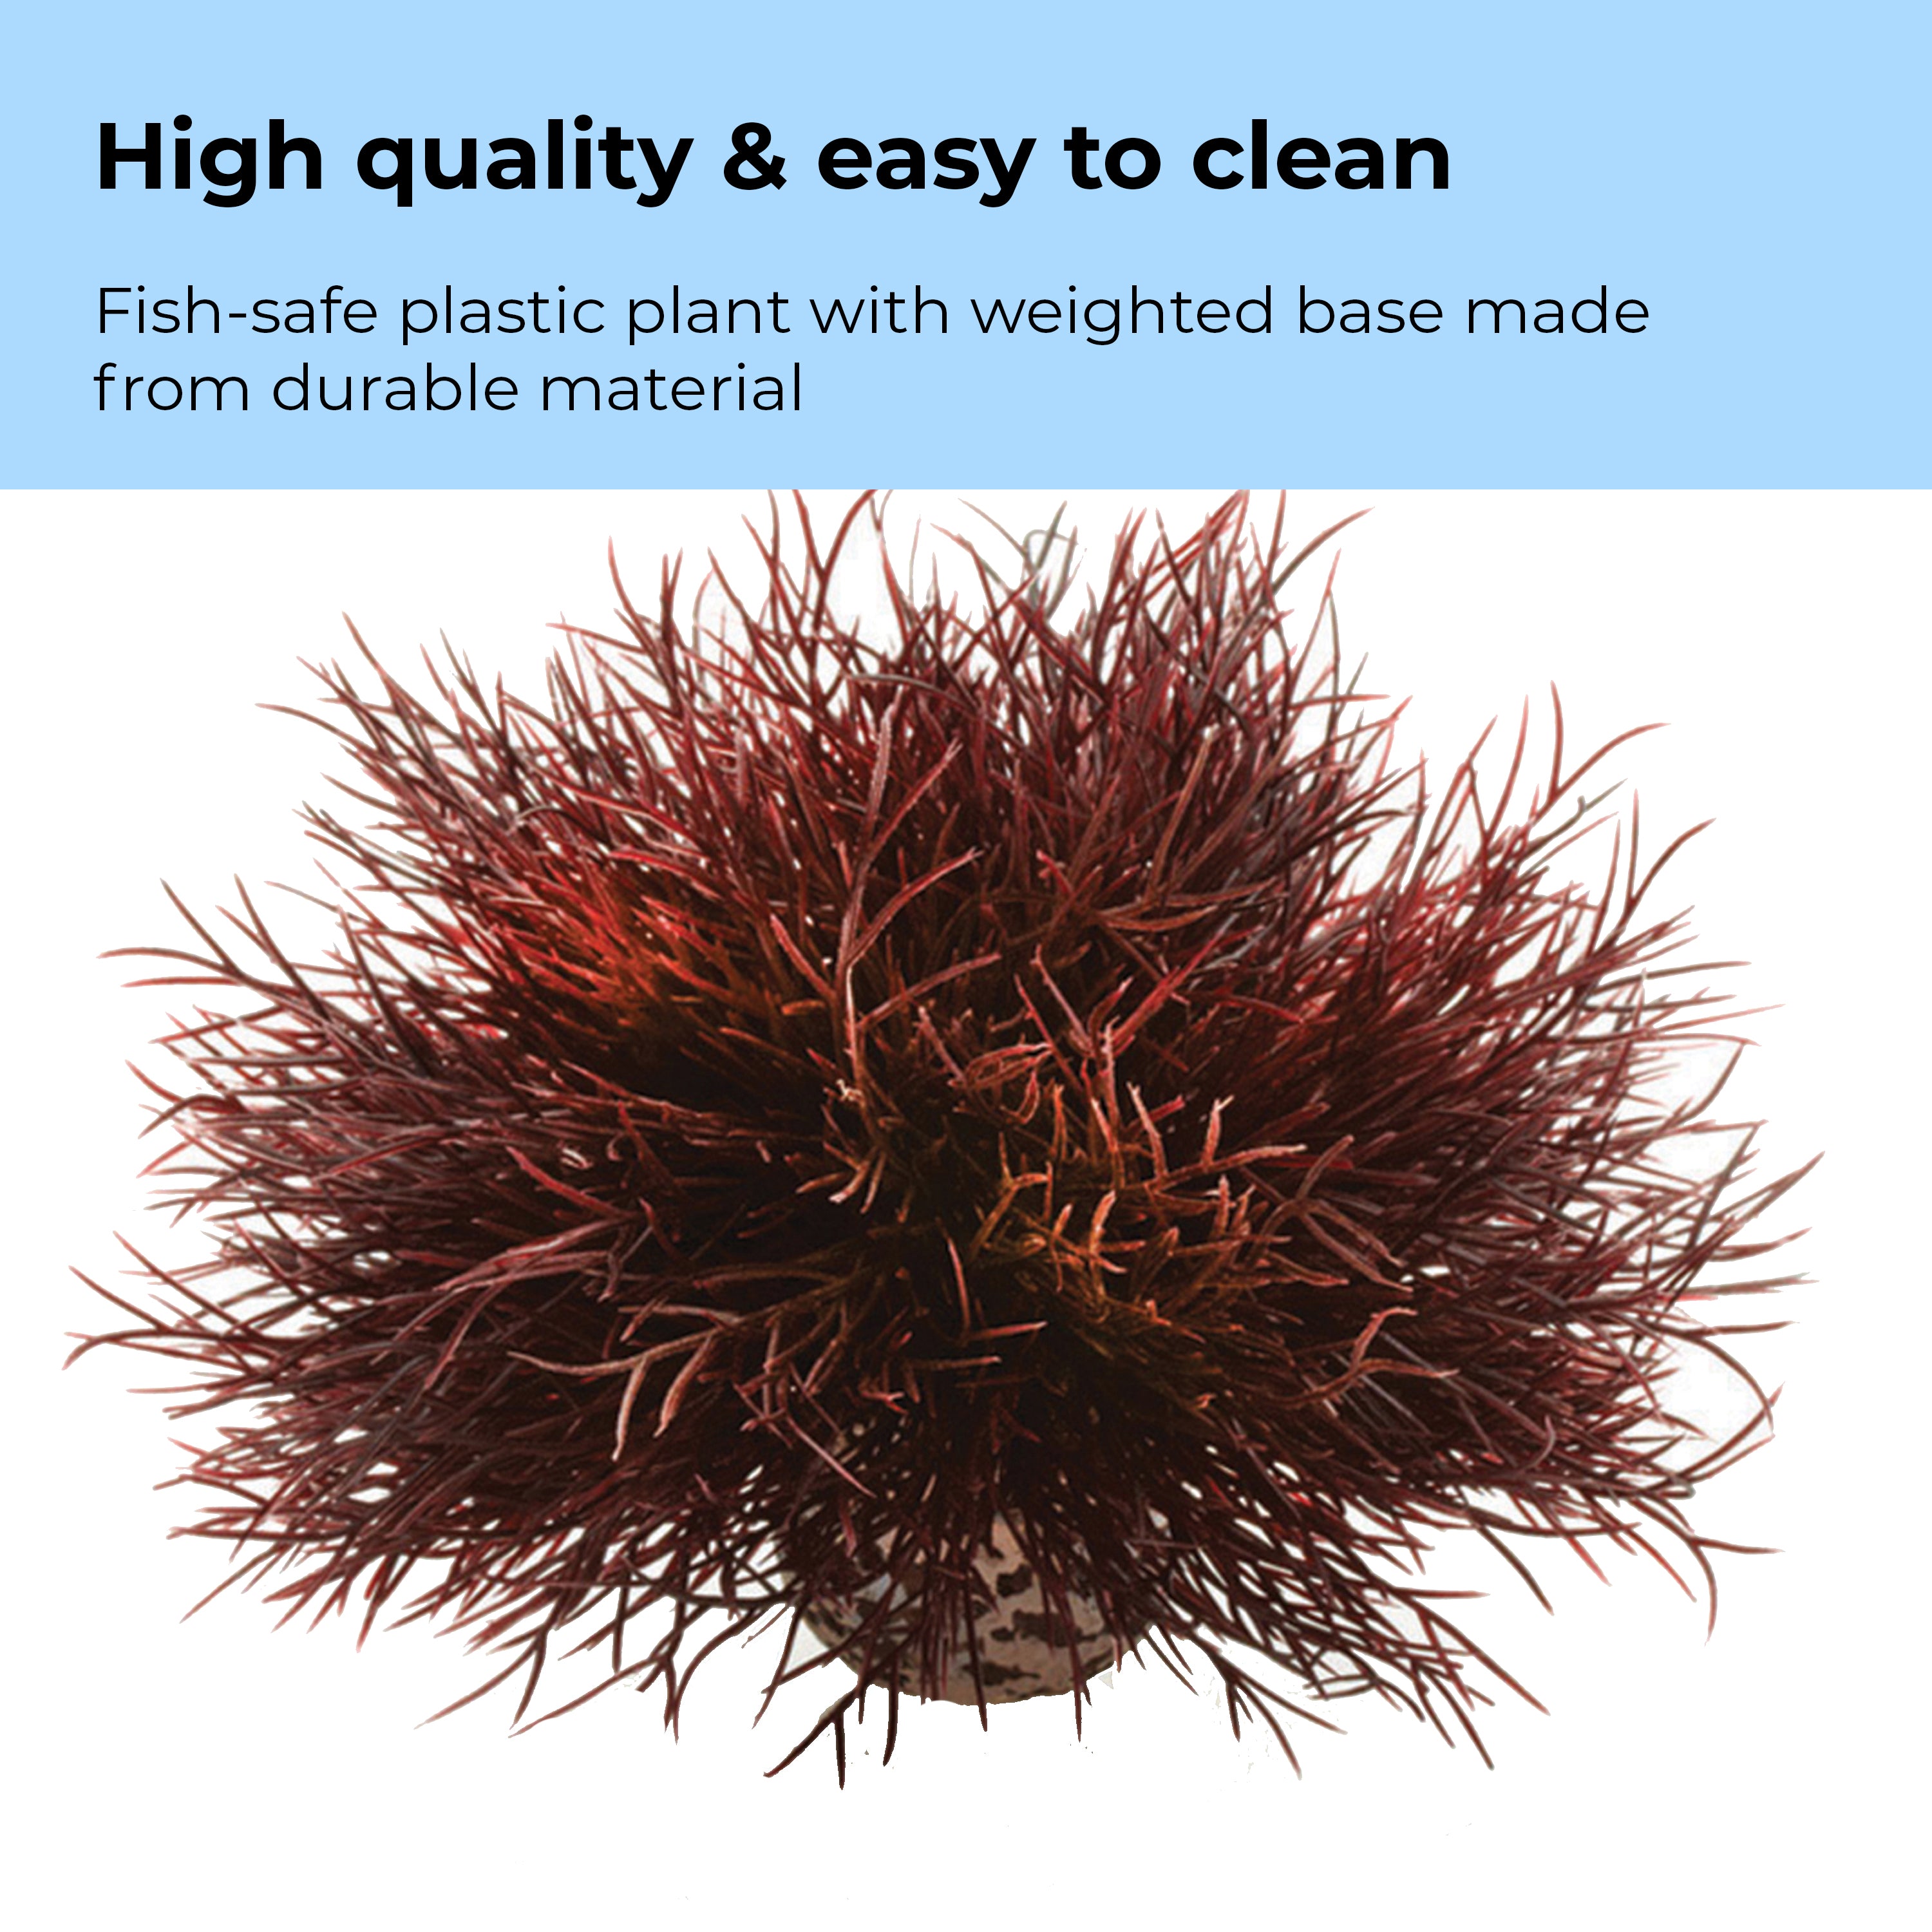 Sea Lily - High quality & easy to clean